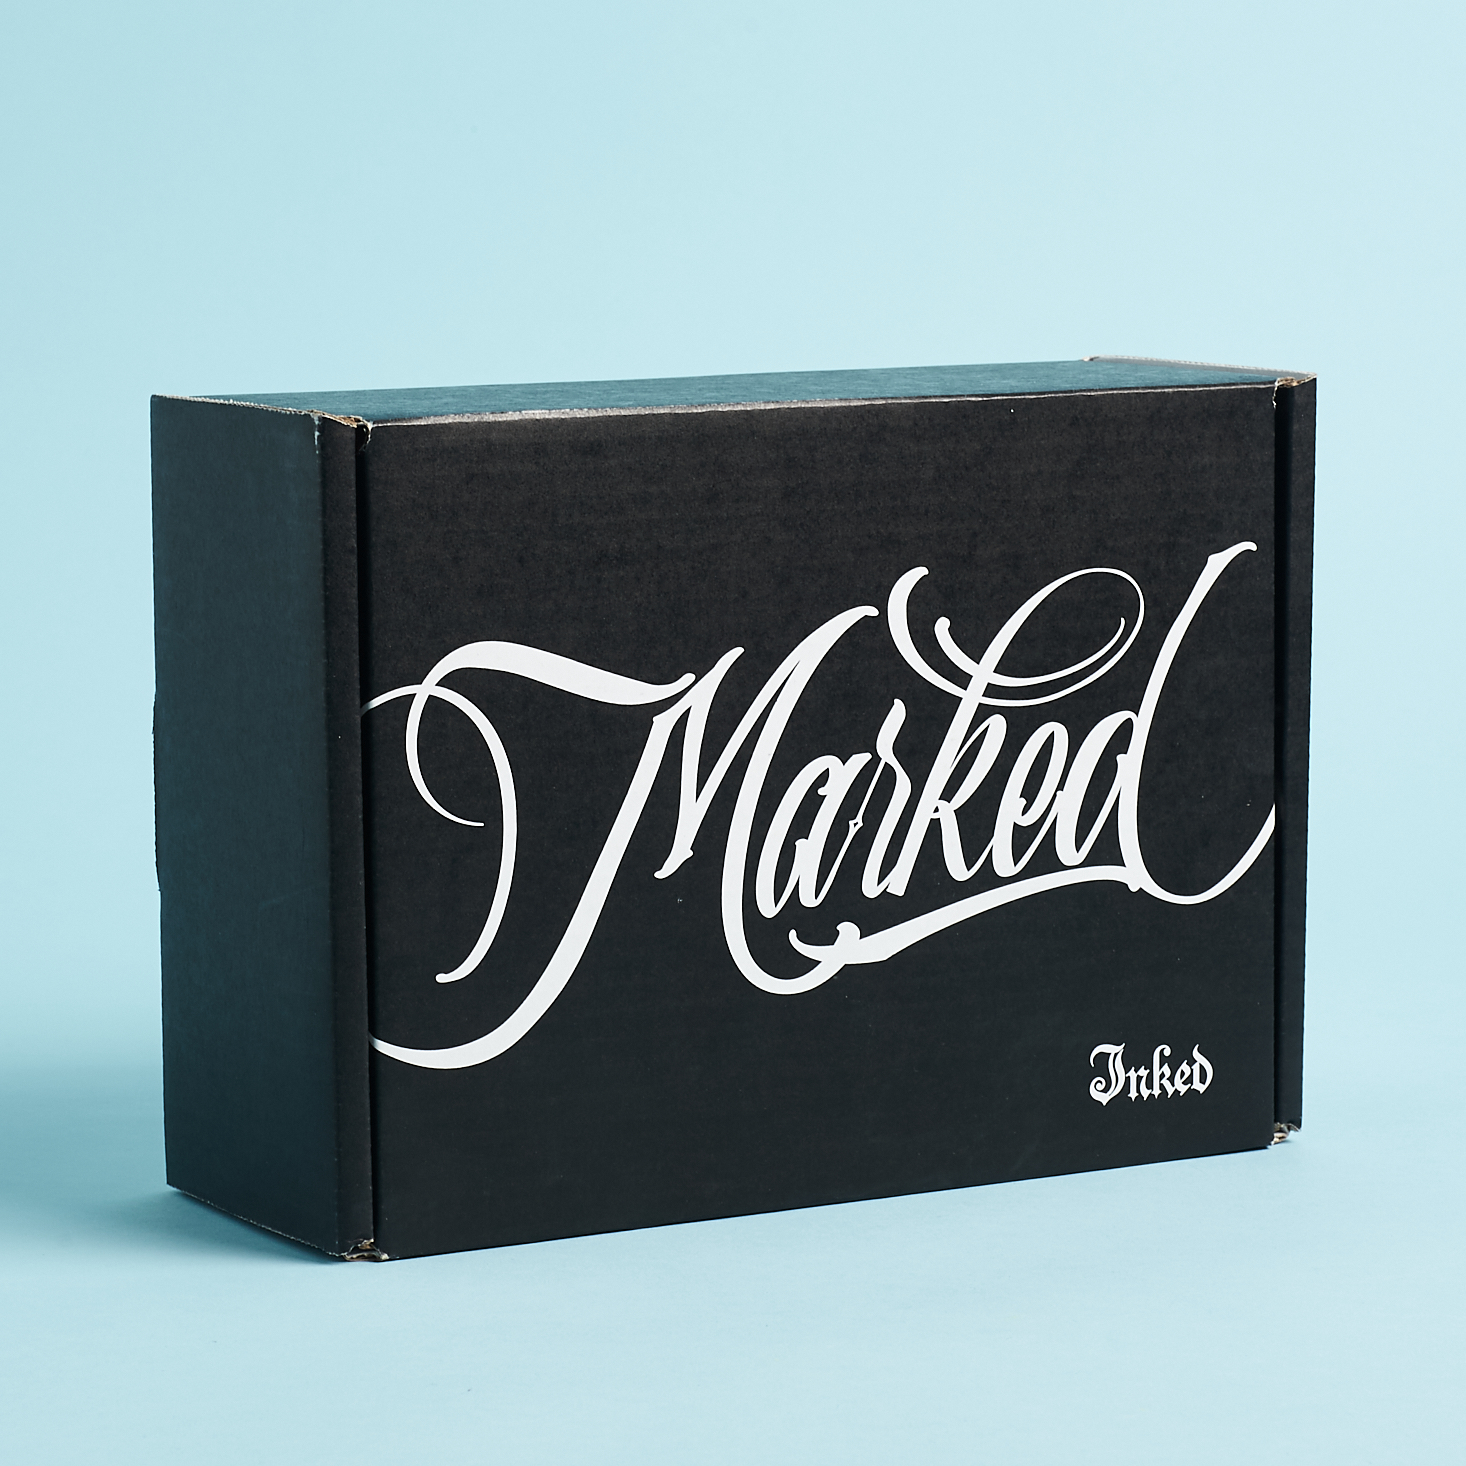 Marked by Inked Subscription Box Review – August 2020